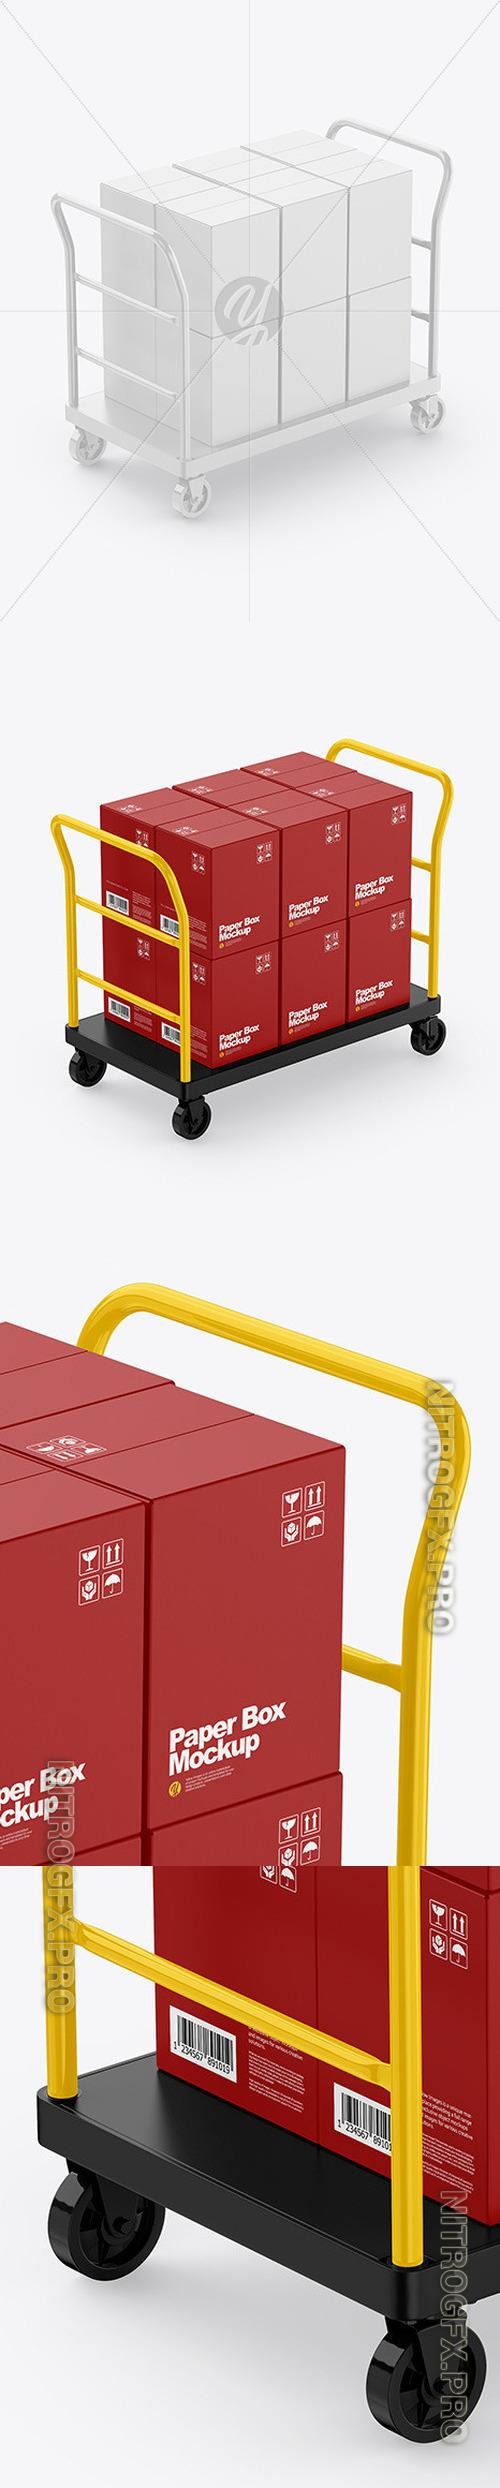 Warehouse Trolley With Boxes Mockup - 58789